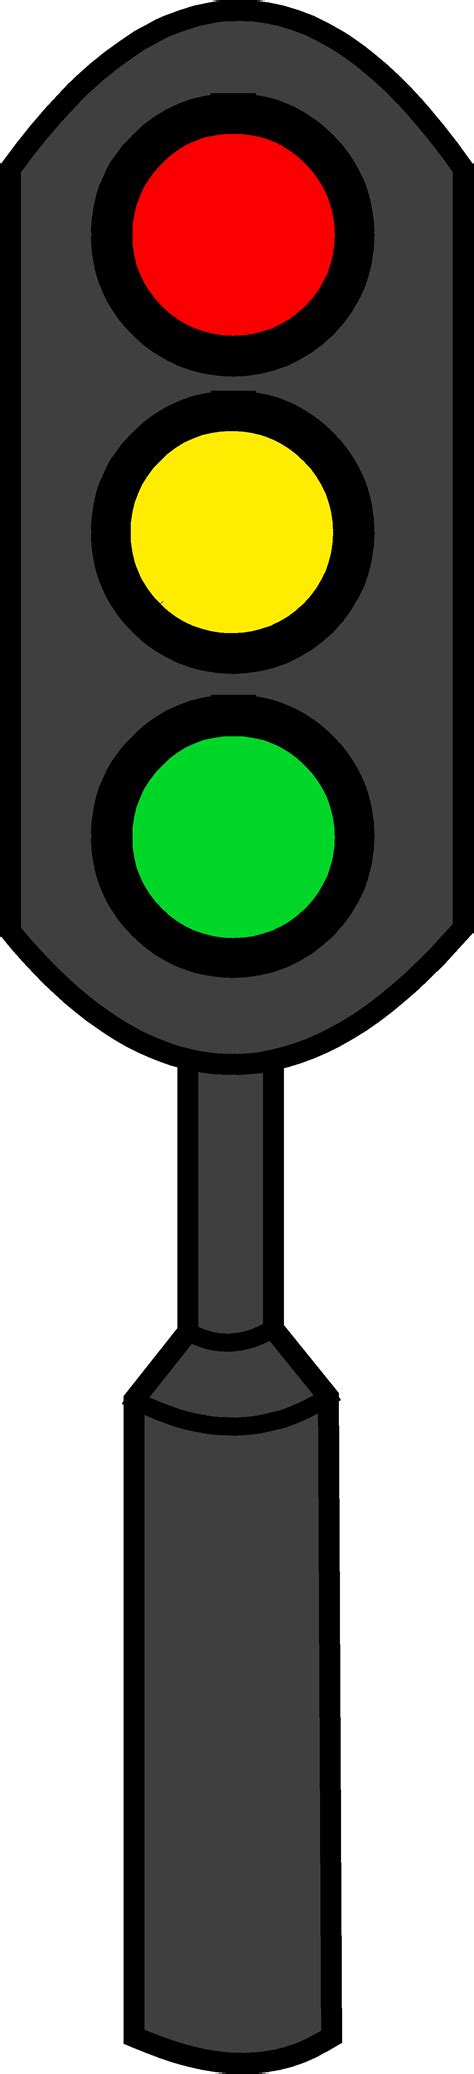 Free Images Of Traffic Lights Download Free Images Of Traffic Lights